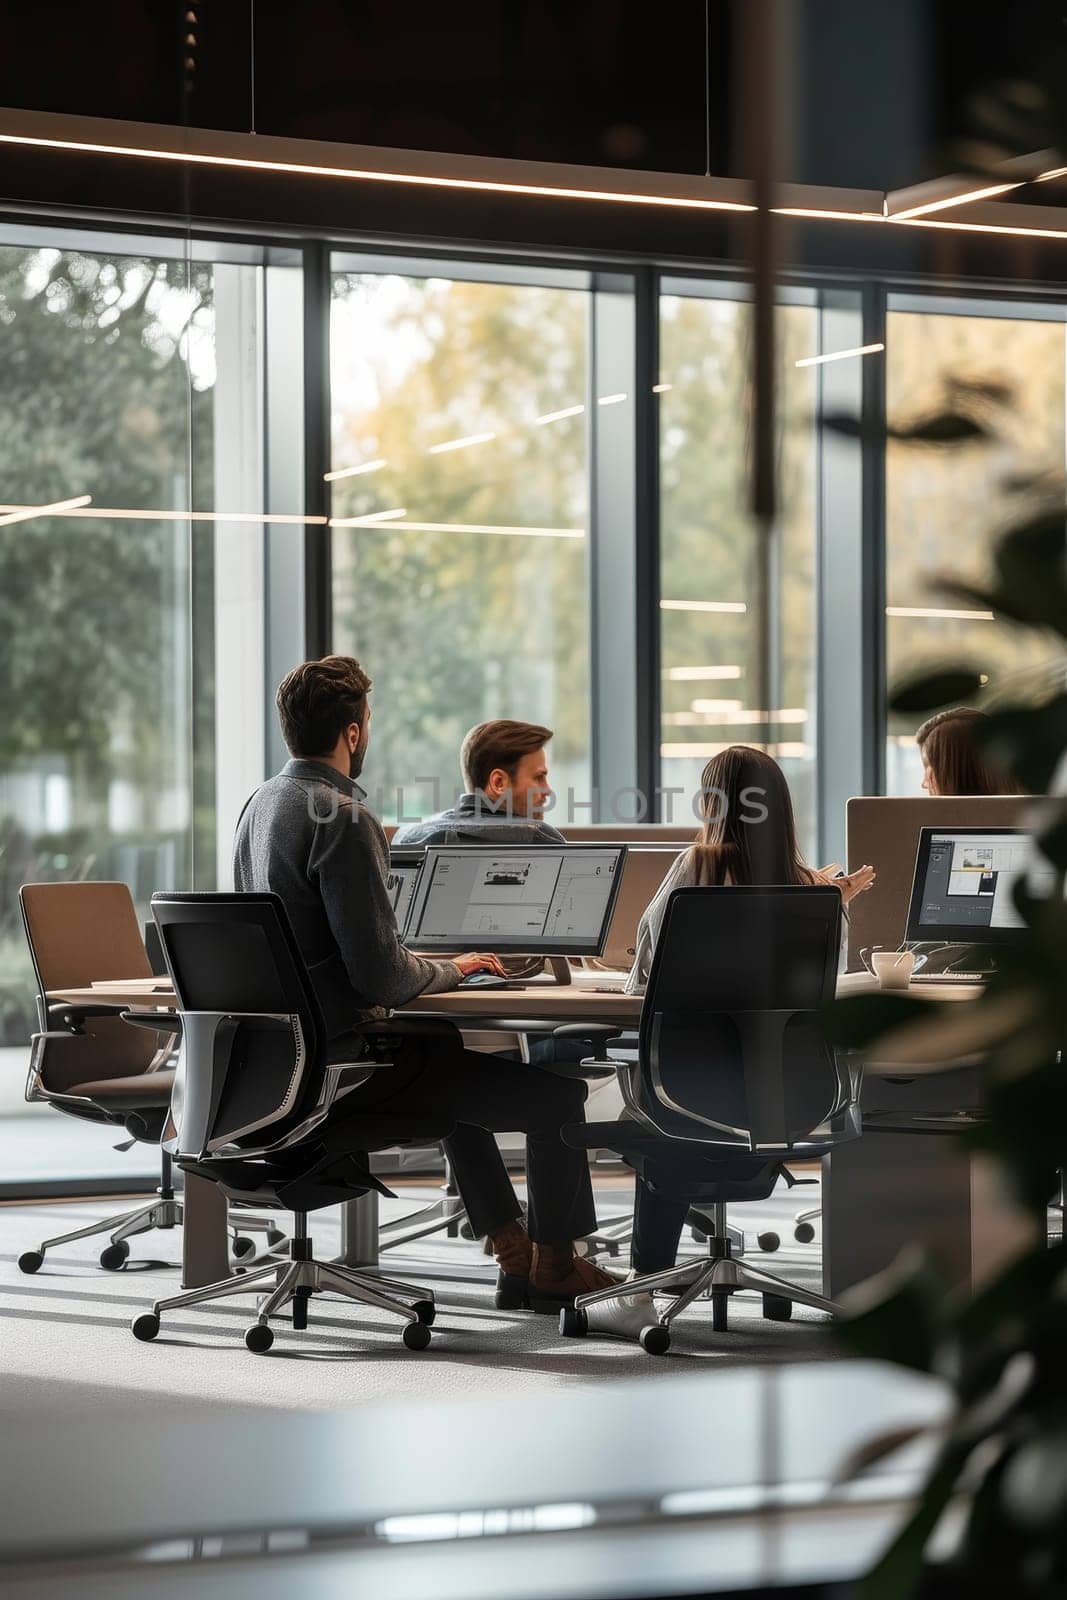 This image shows a team of diverse professionals collaborating at a spacious open-plan office with a city view. The setting is vibrant and dynamic, reflecting a modern, collaborative work culture.